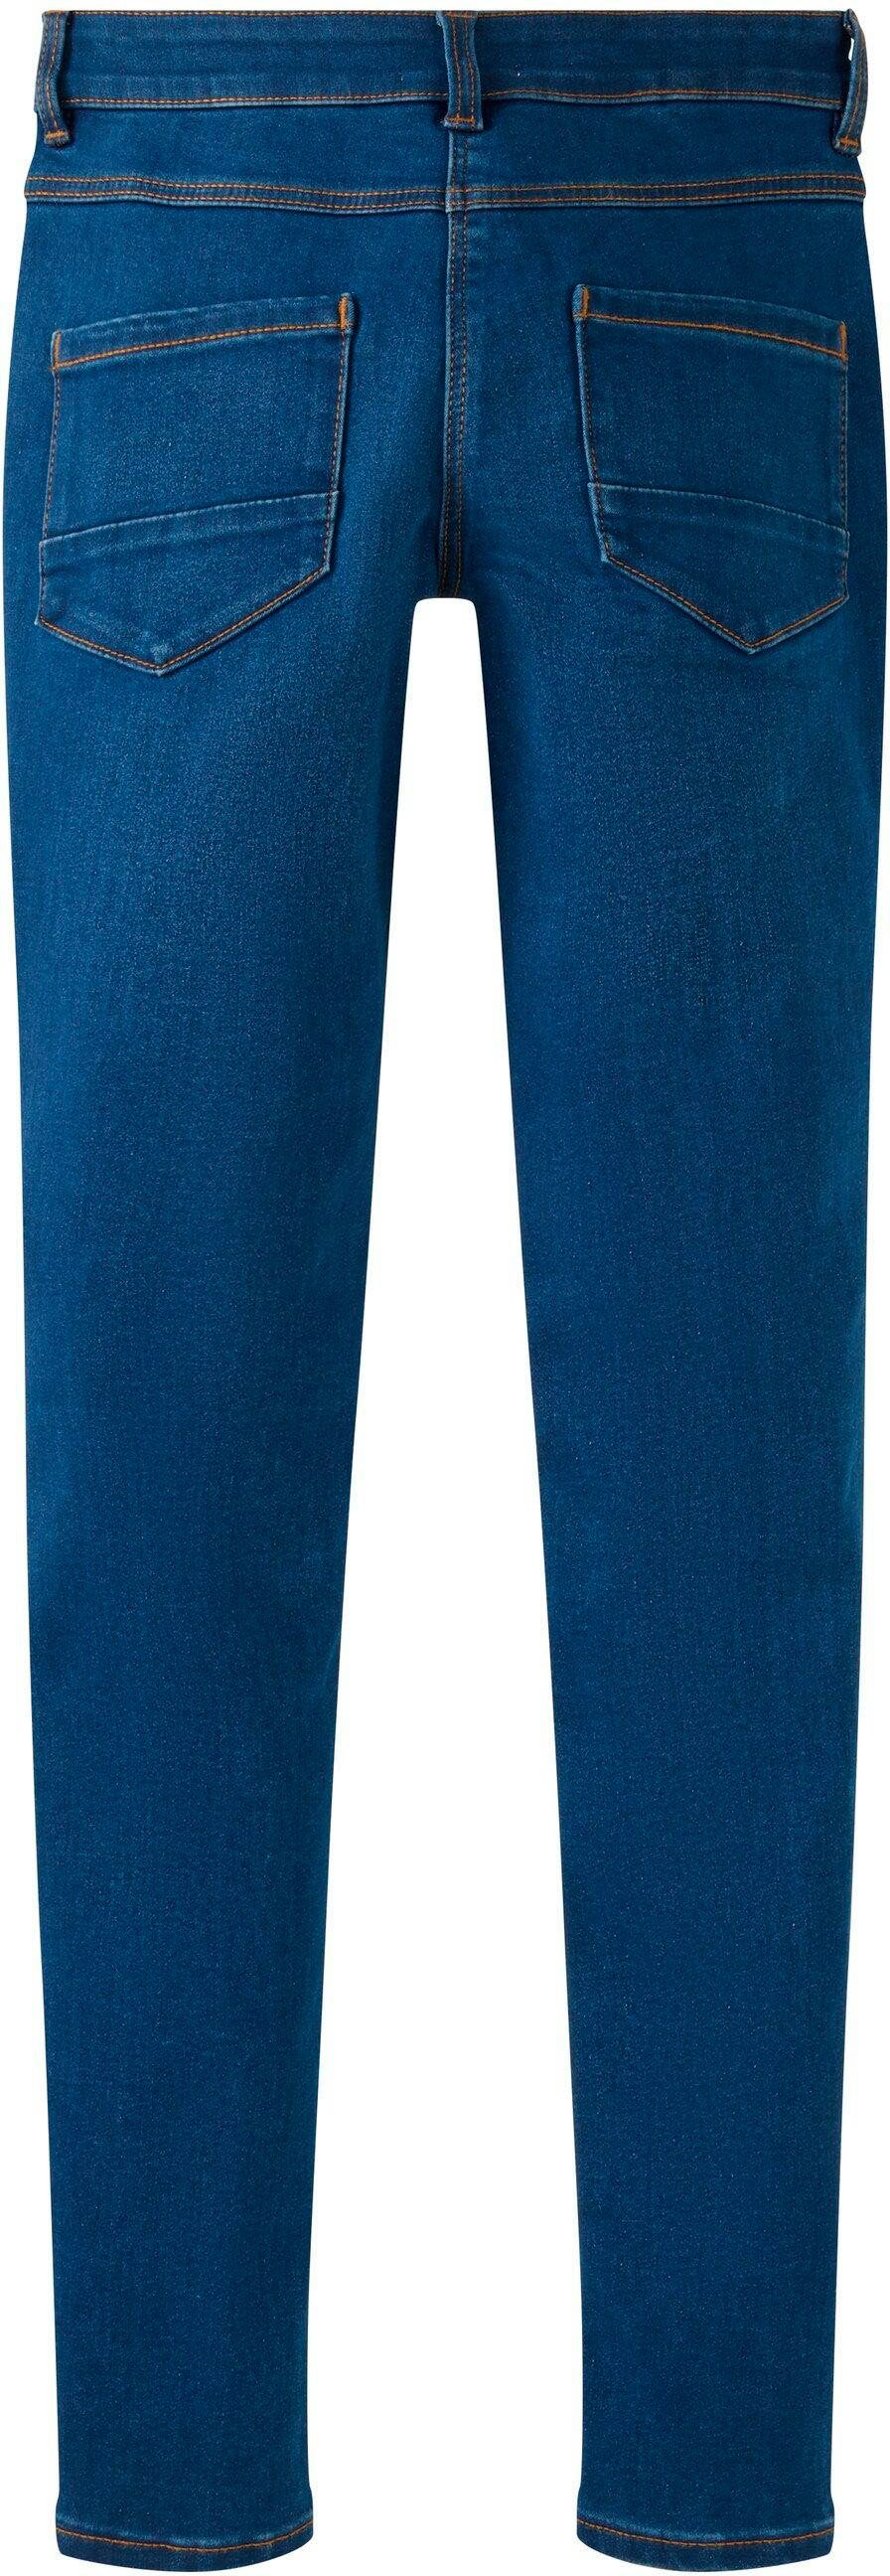 TOM TAILOR Skinny-fit-Jeans Lissie mit Knopf- und Reißverschluss,  Skinny-fit-Jeans von TOM TAILOR